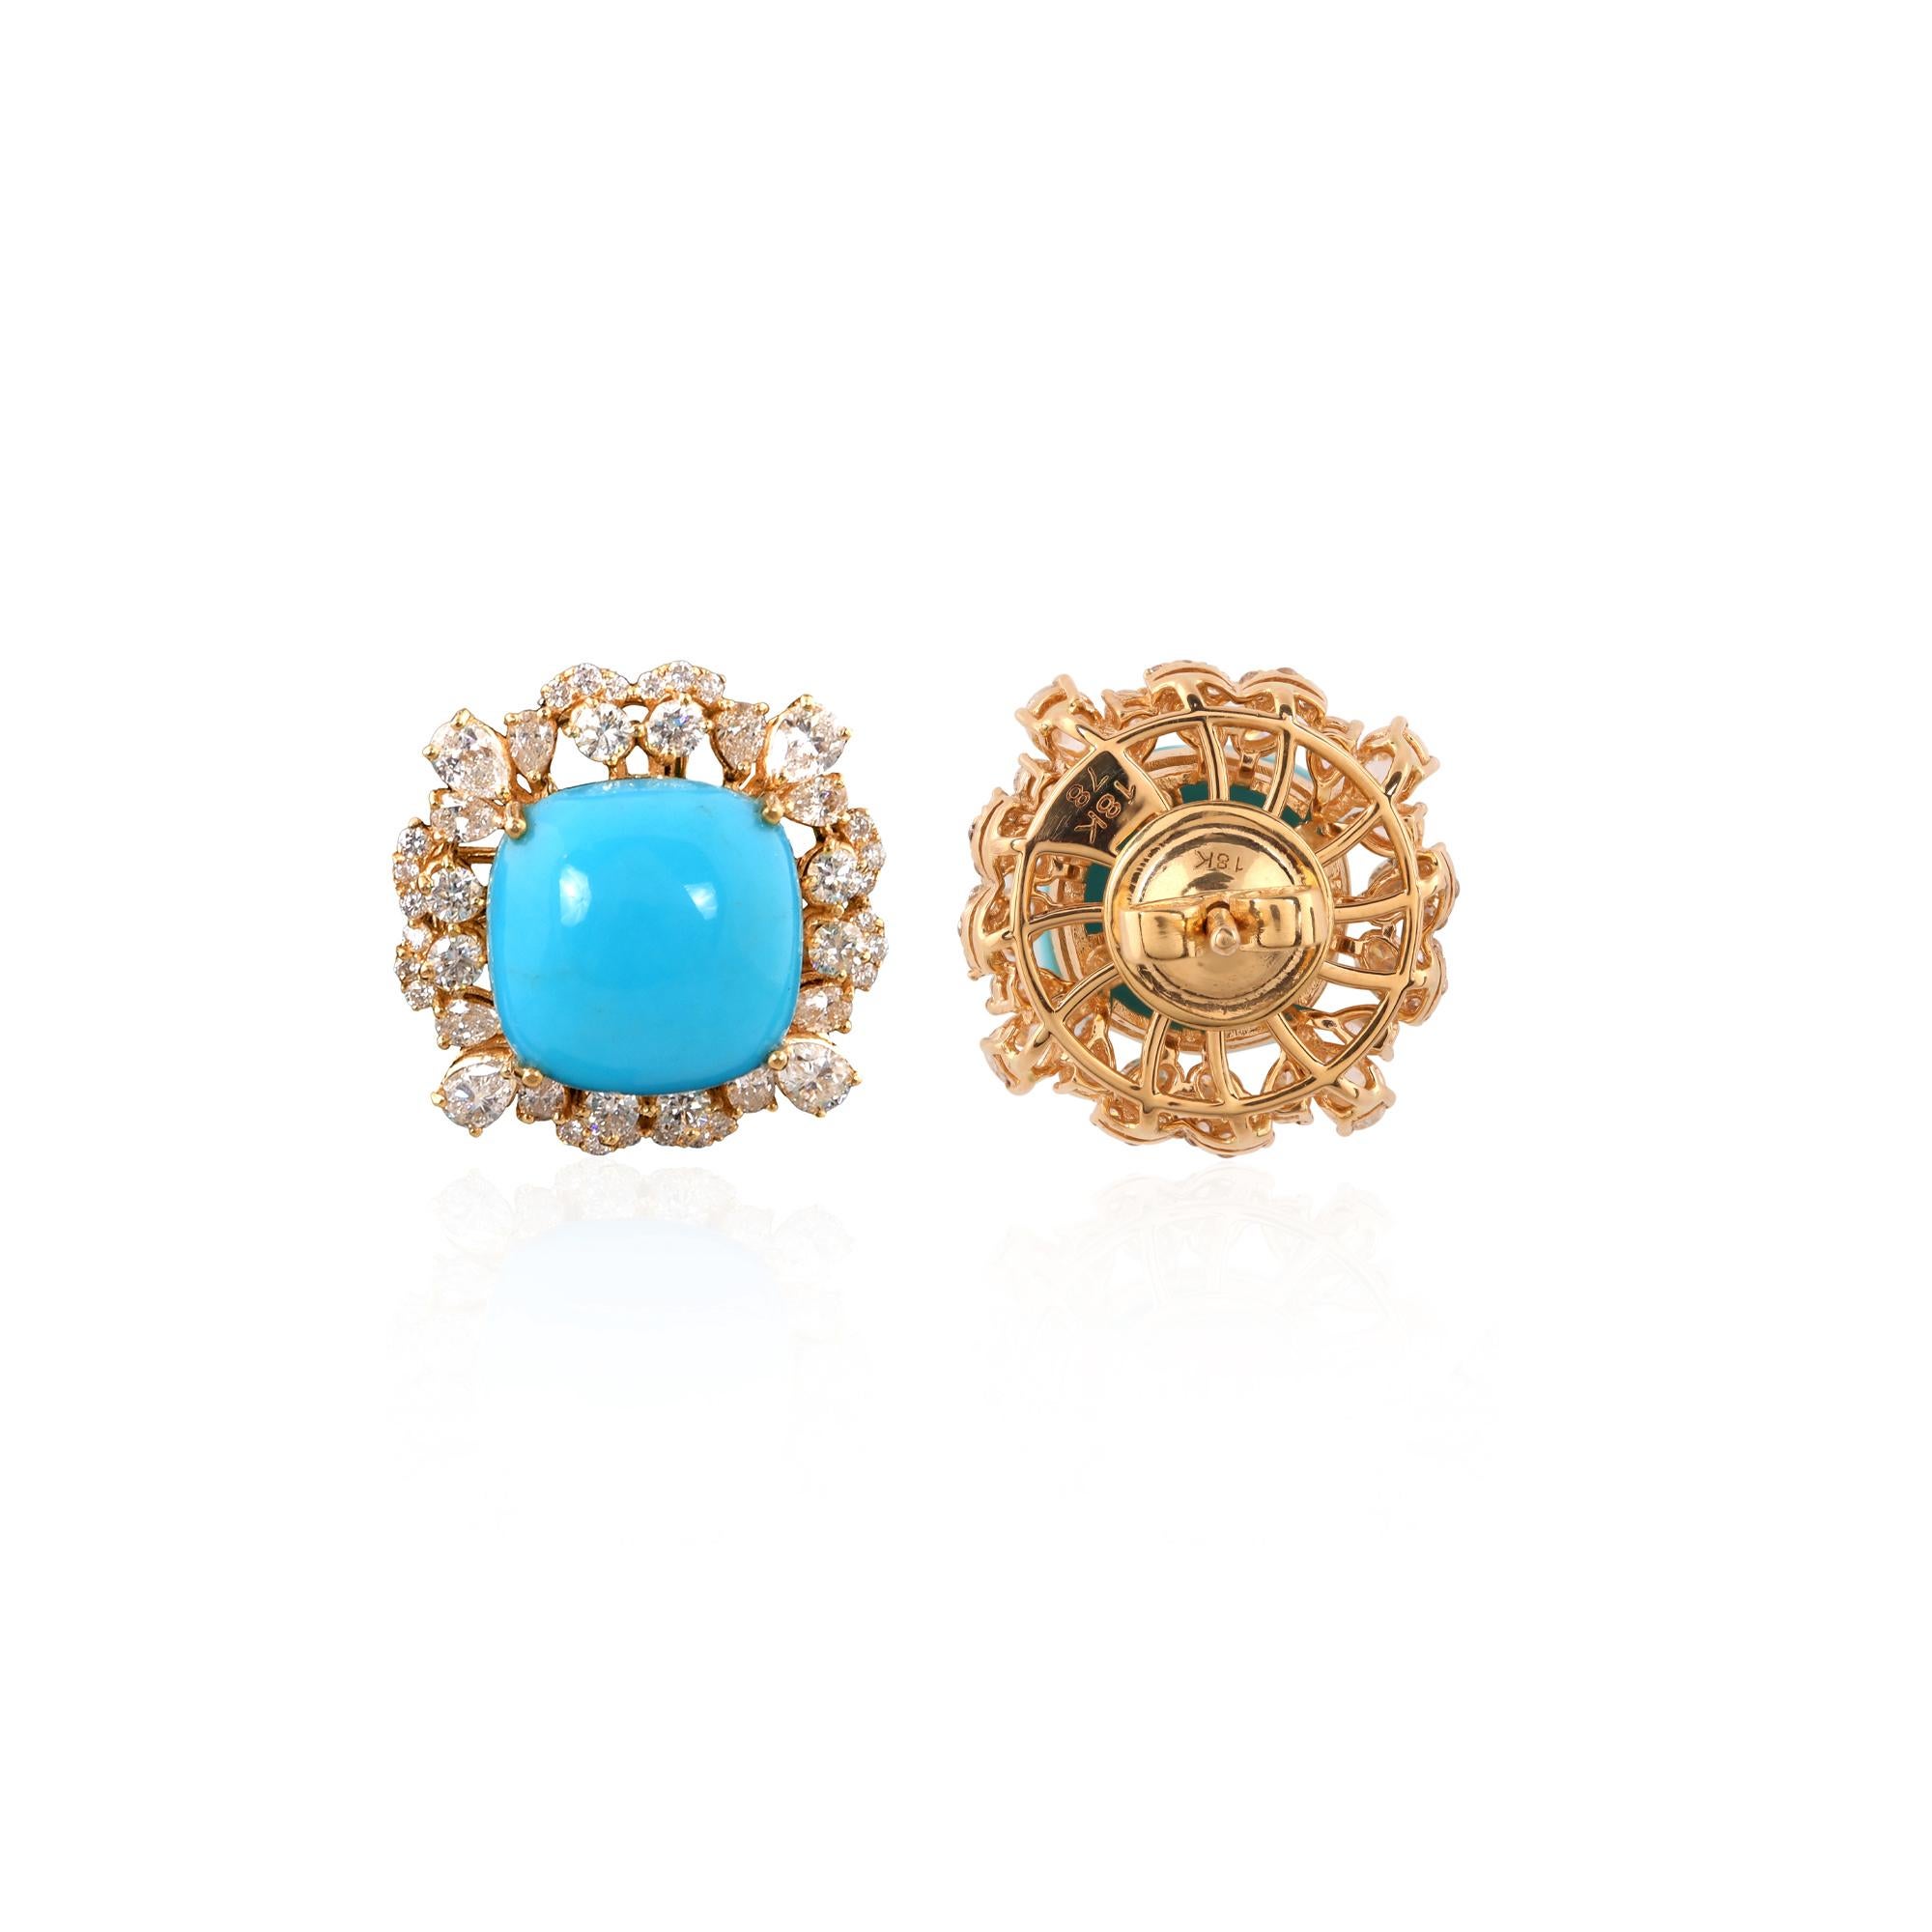 The vibrant turquoise stones are meticulously hand-selected to ensure the highest quality and brilliance, reflecting the rich heritage of this cherished gemstone. Complementing the turquoise centerpiece are sparkling diamonds, delicately set around